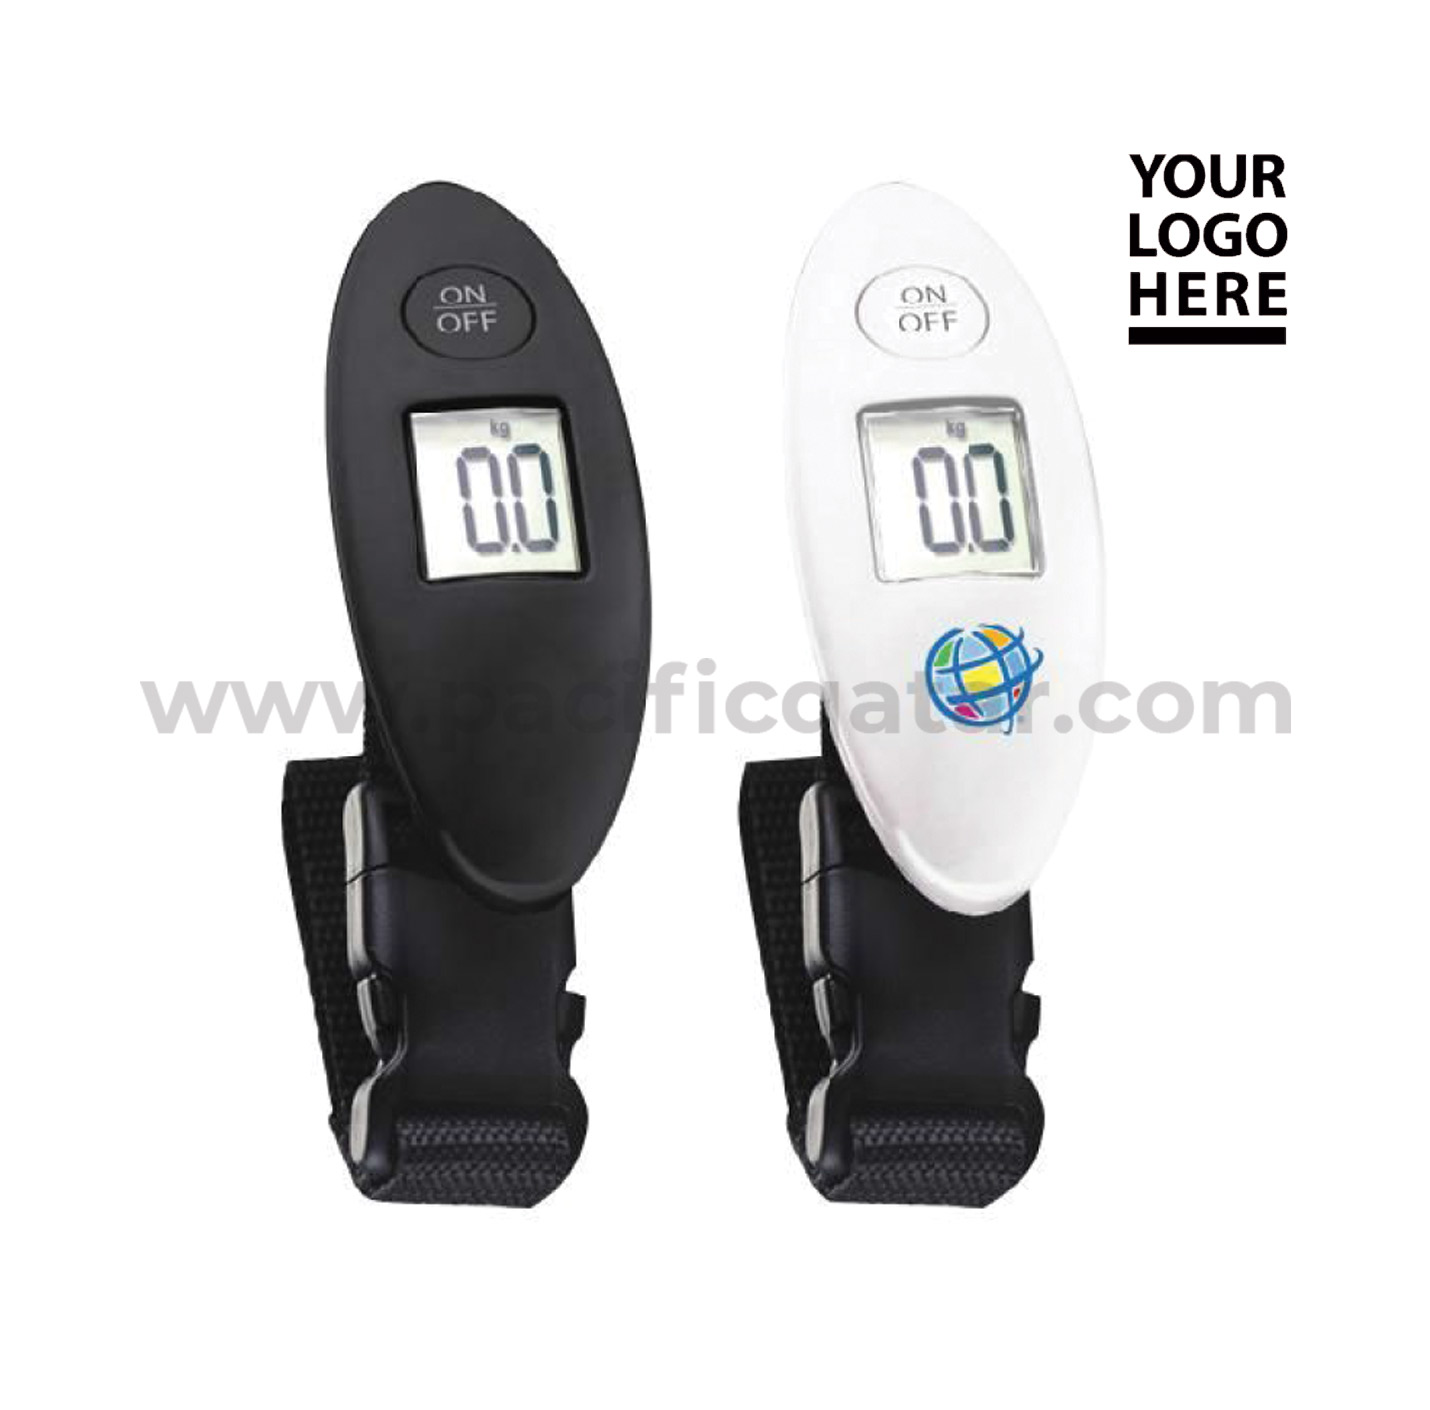 Luggage Scale with digital display white and black color